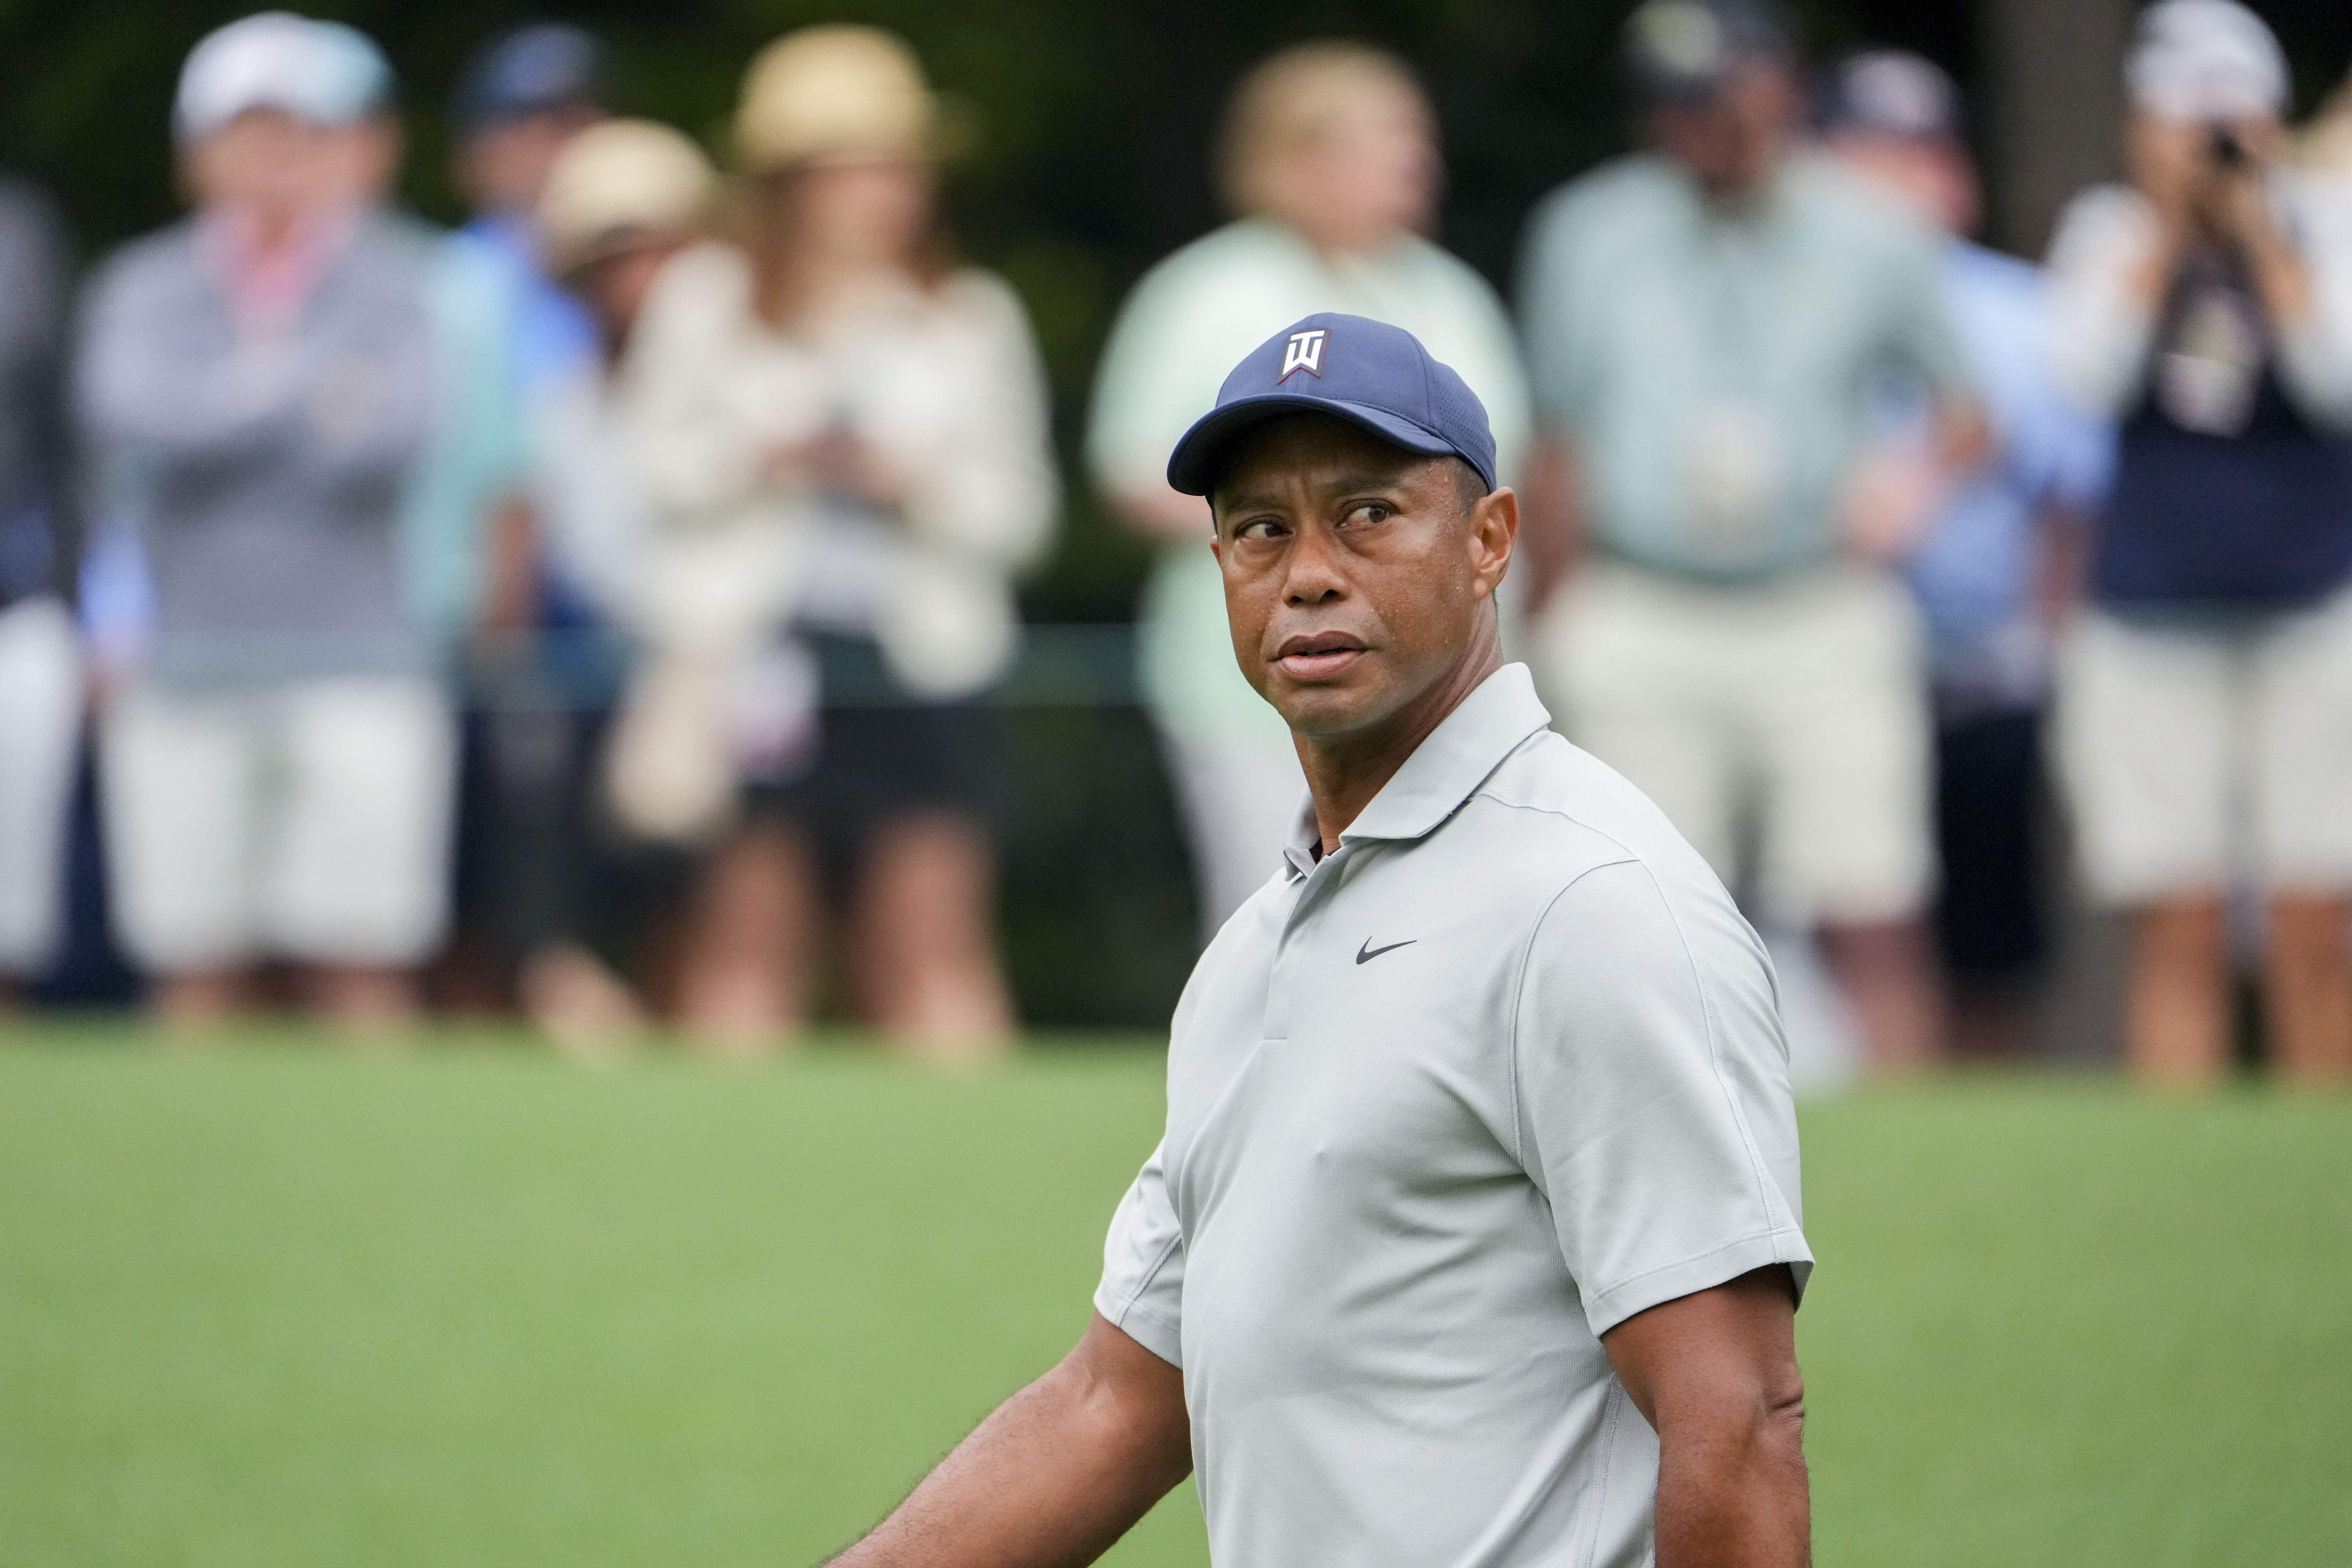 ‘I don’t know how many more I have in me’: Tiger Woods opens up on his Masters future at Augusta National